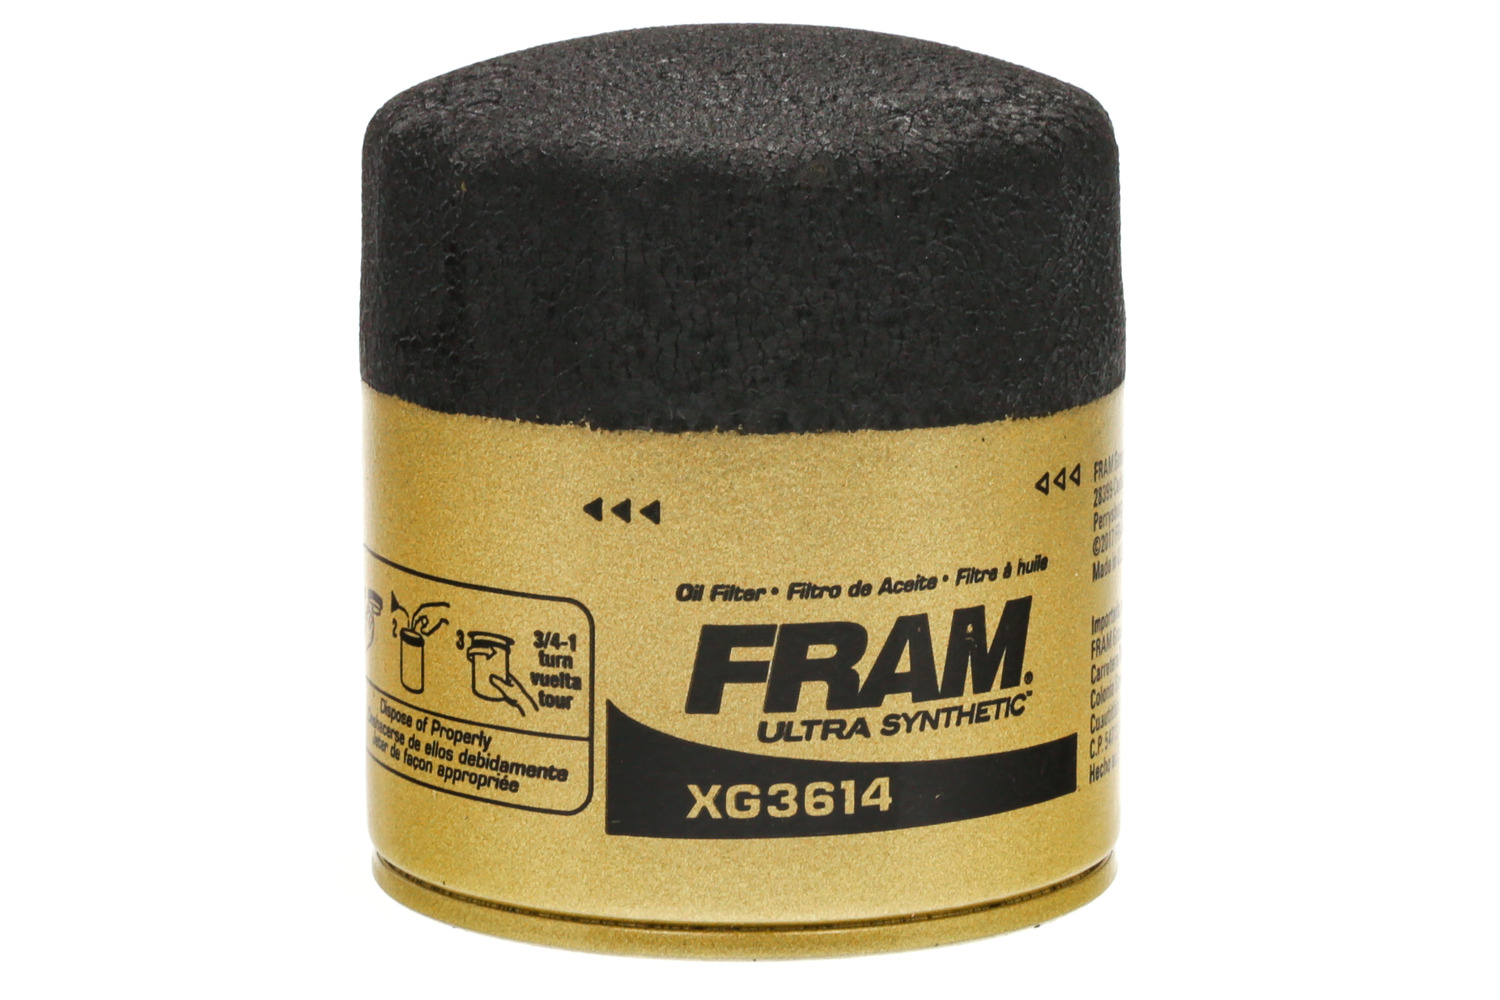 FRAM Ultra Synthetic Oil Filter, XG3614, 20K mile Replacement Engine Oil Filter for Select Ford Vehicles - image 4 of 10